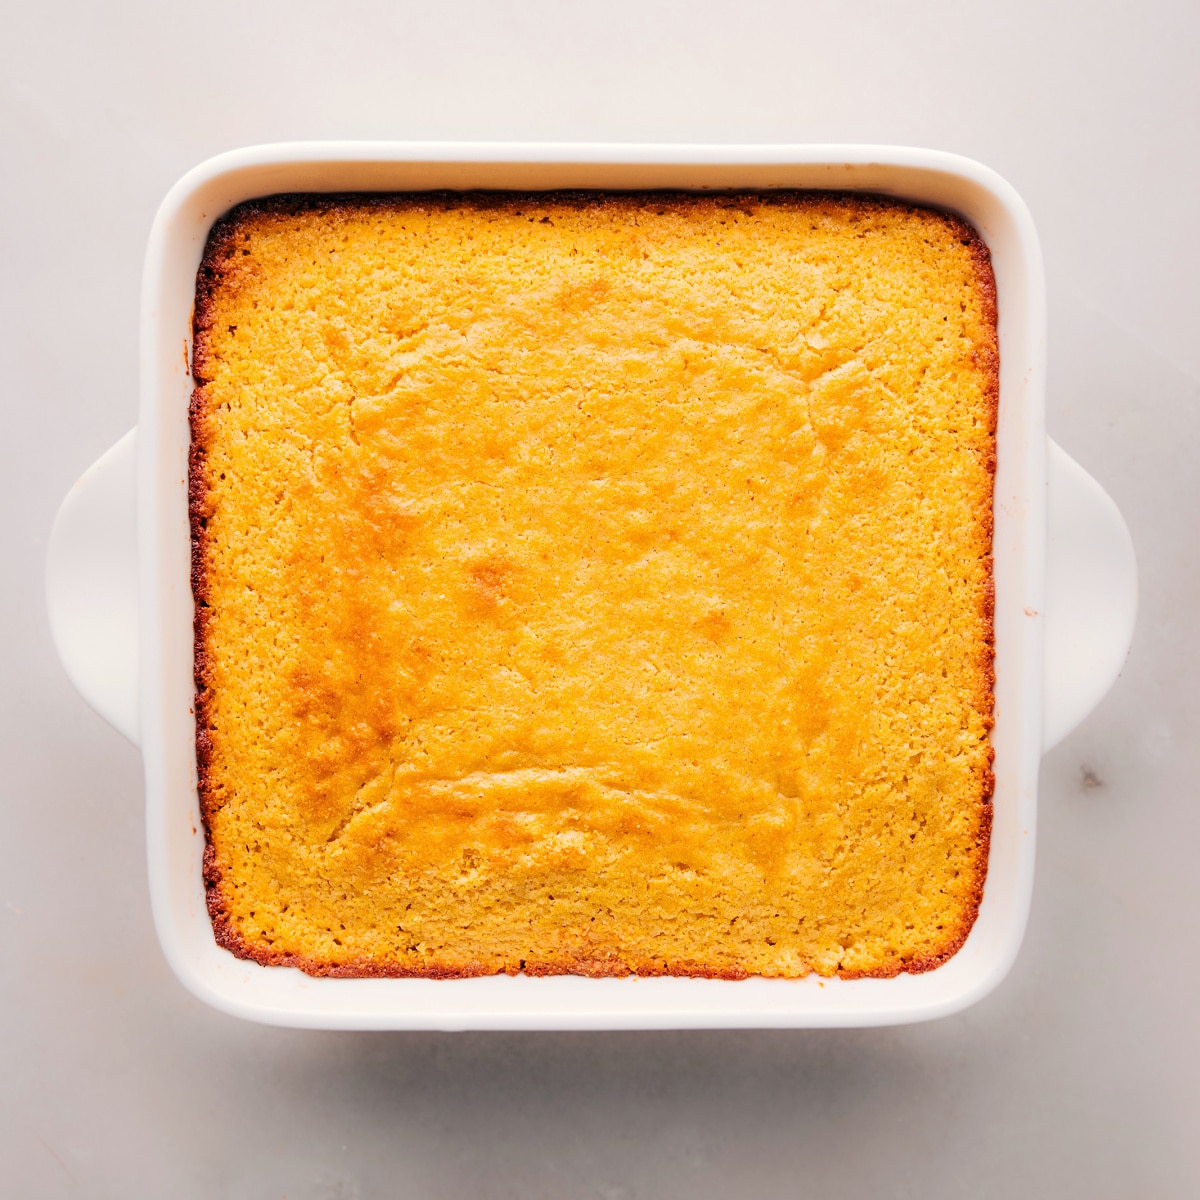 Freshly baked cornbread in a pan, golden-brown and ready to be enjoyed.